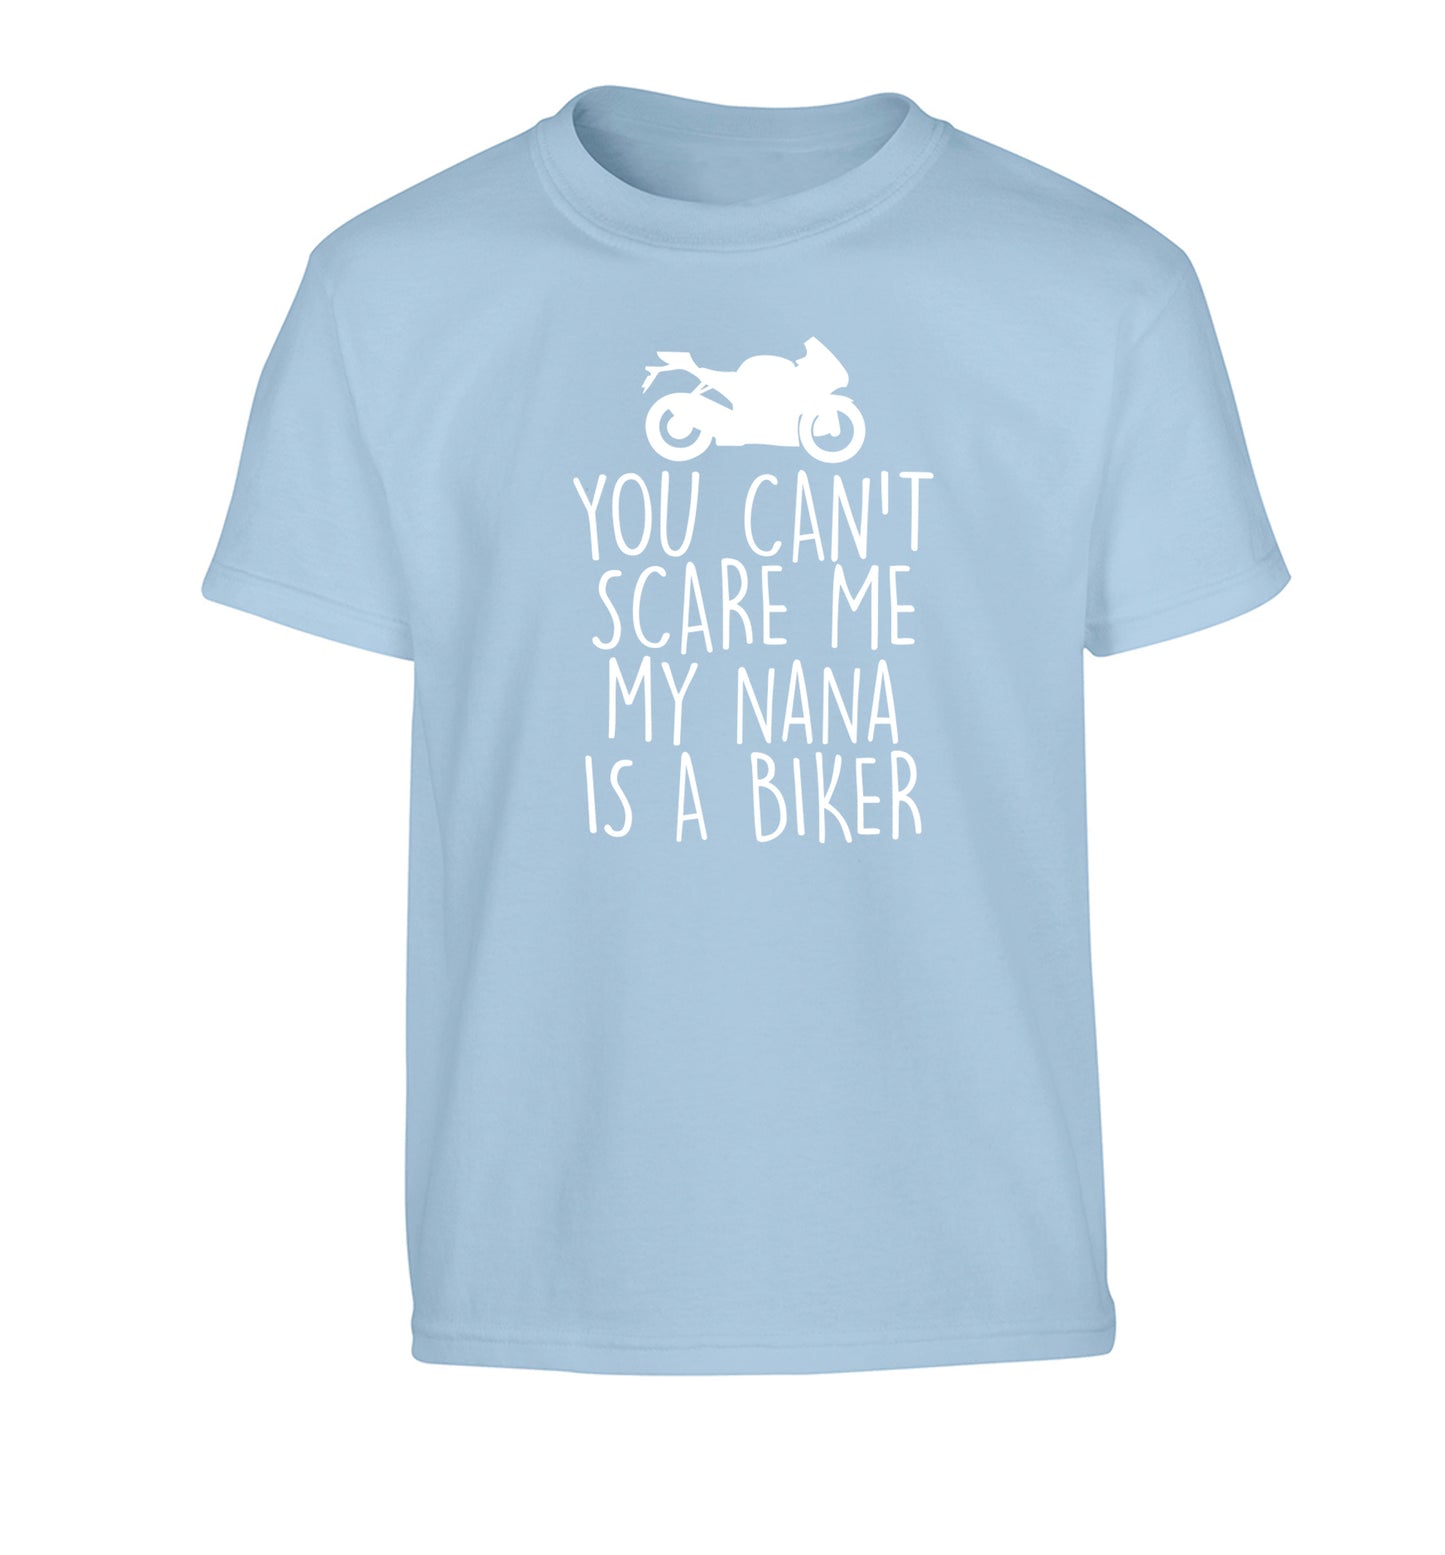 You can't scare me my nana is a biker Children's light blue Tshirt 12-13 Years